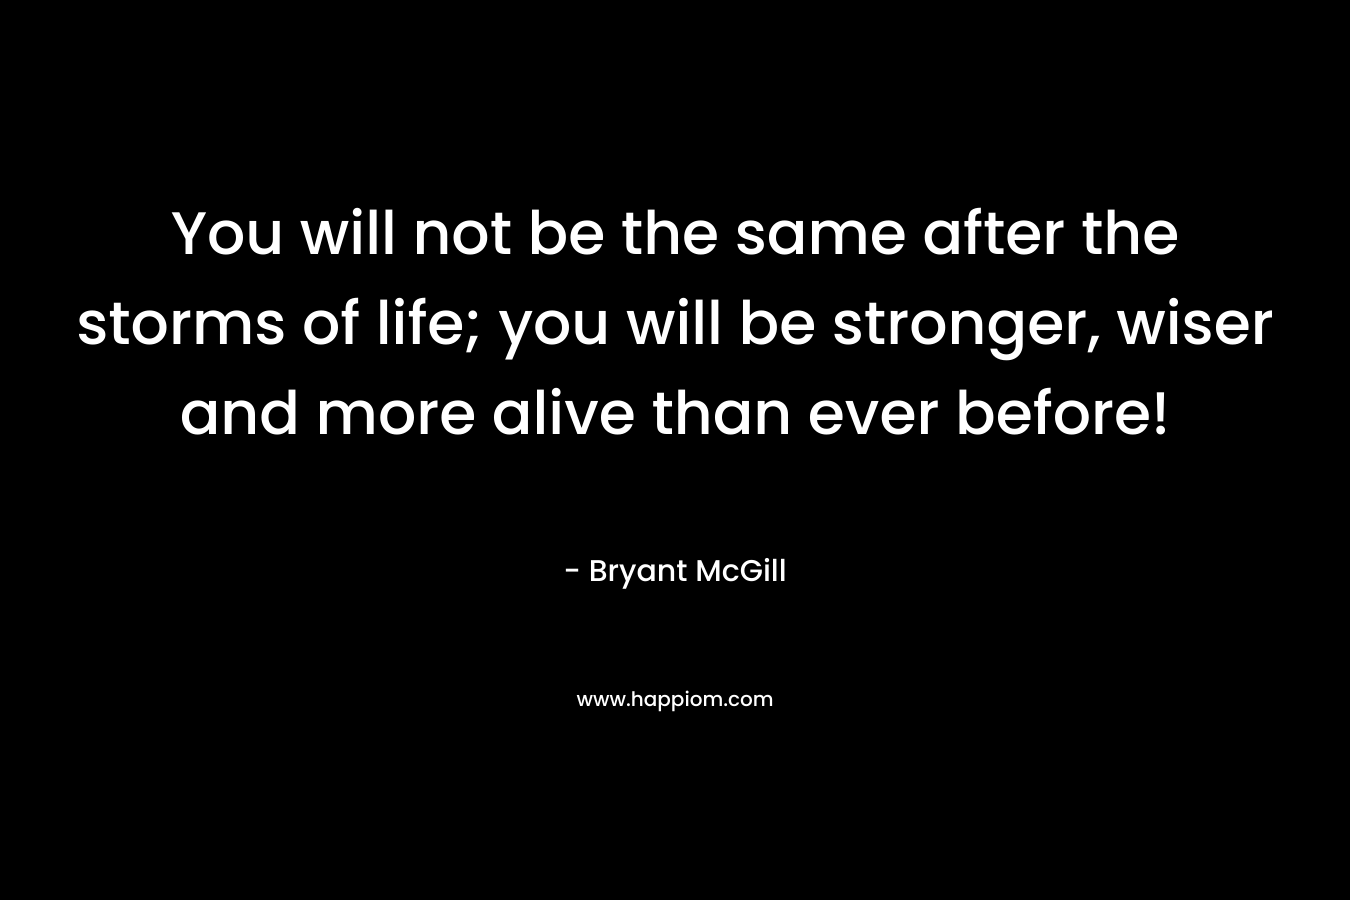 You will not be the same after the storms of life; you will be stronger, wiser and more alive than ever before!